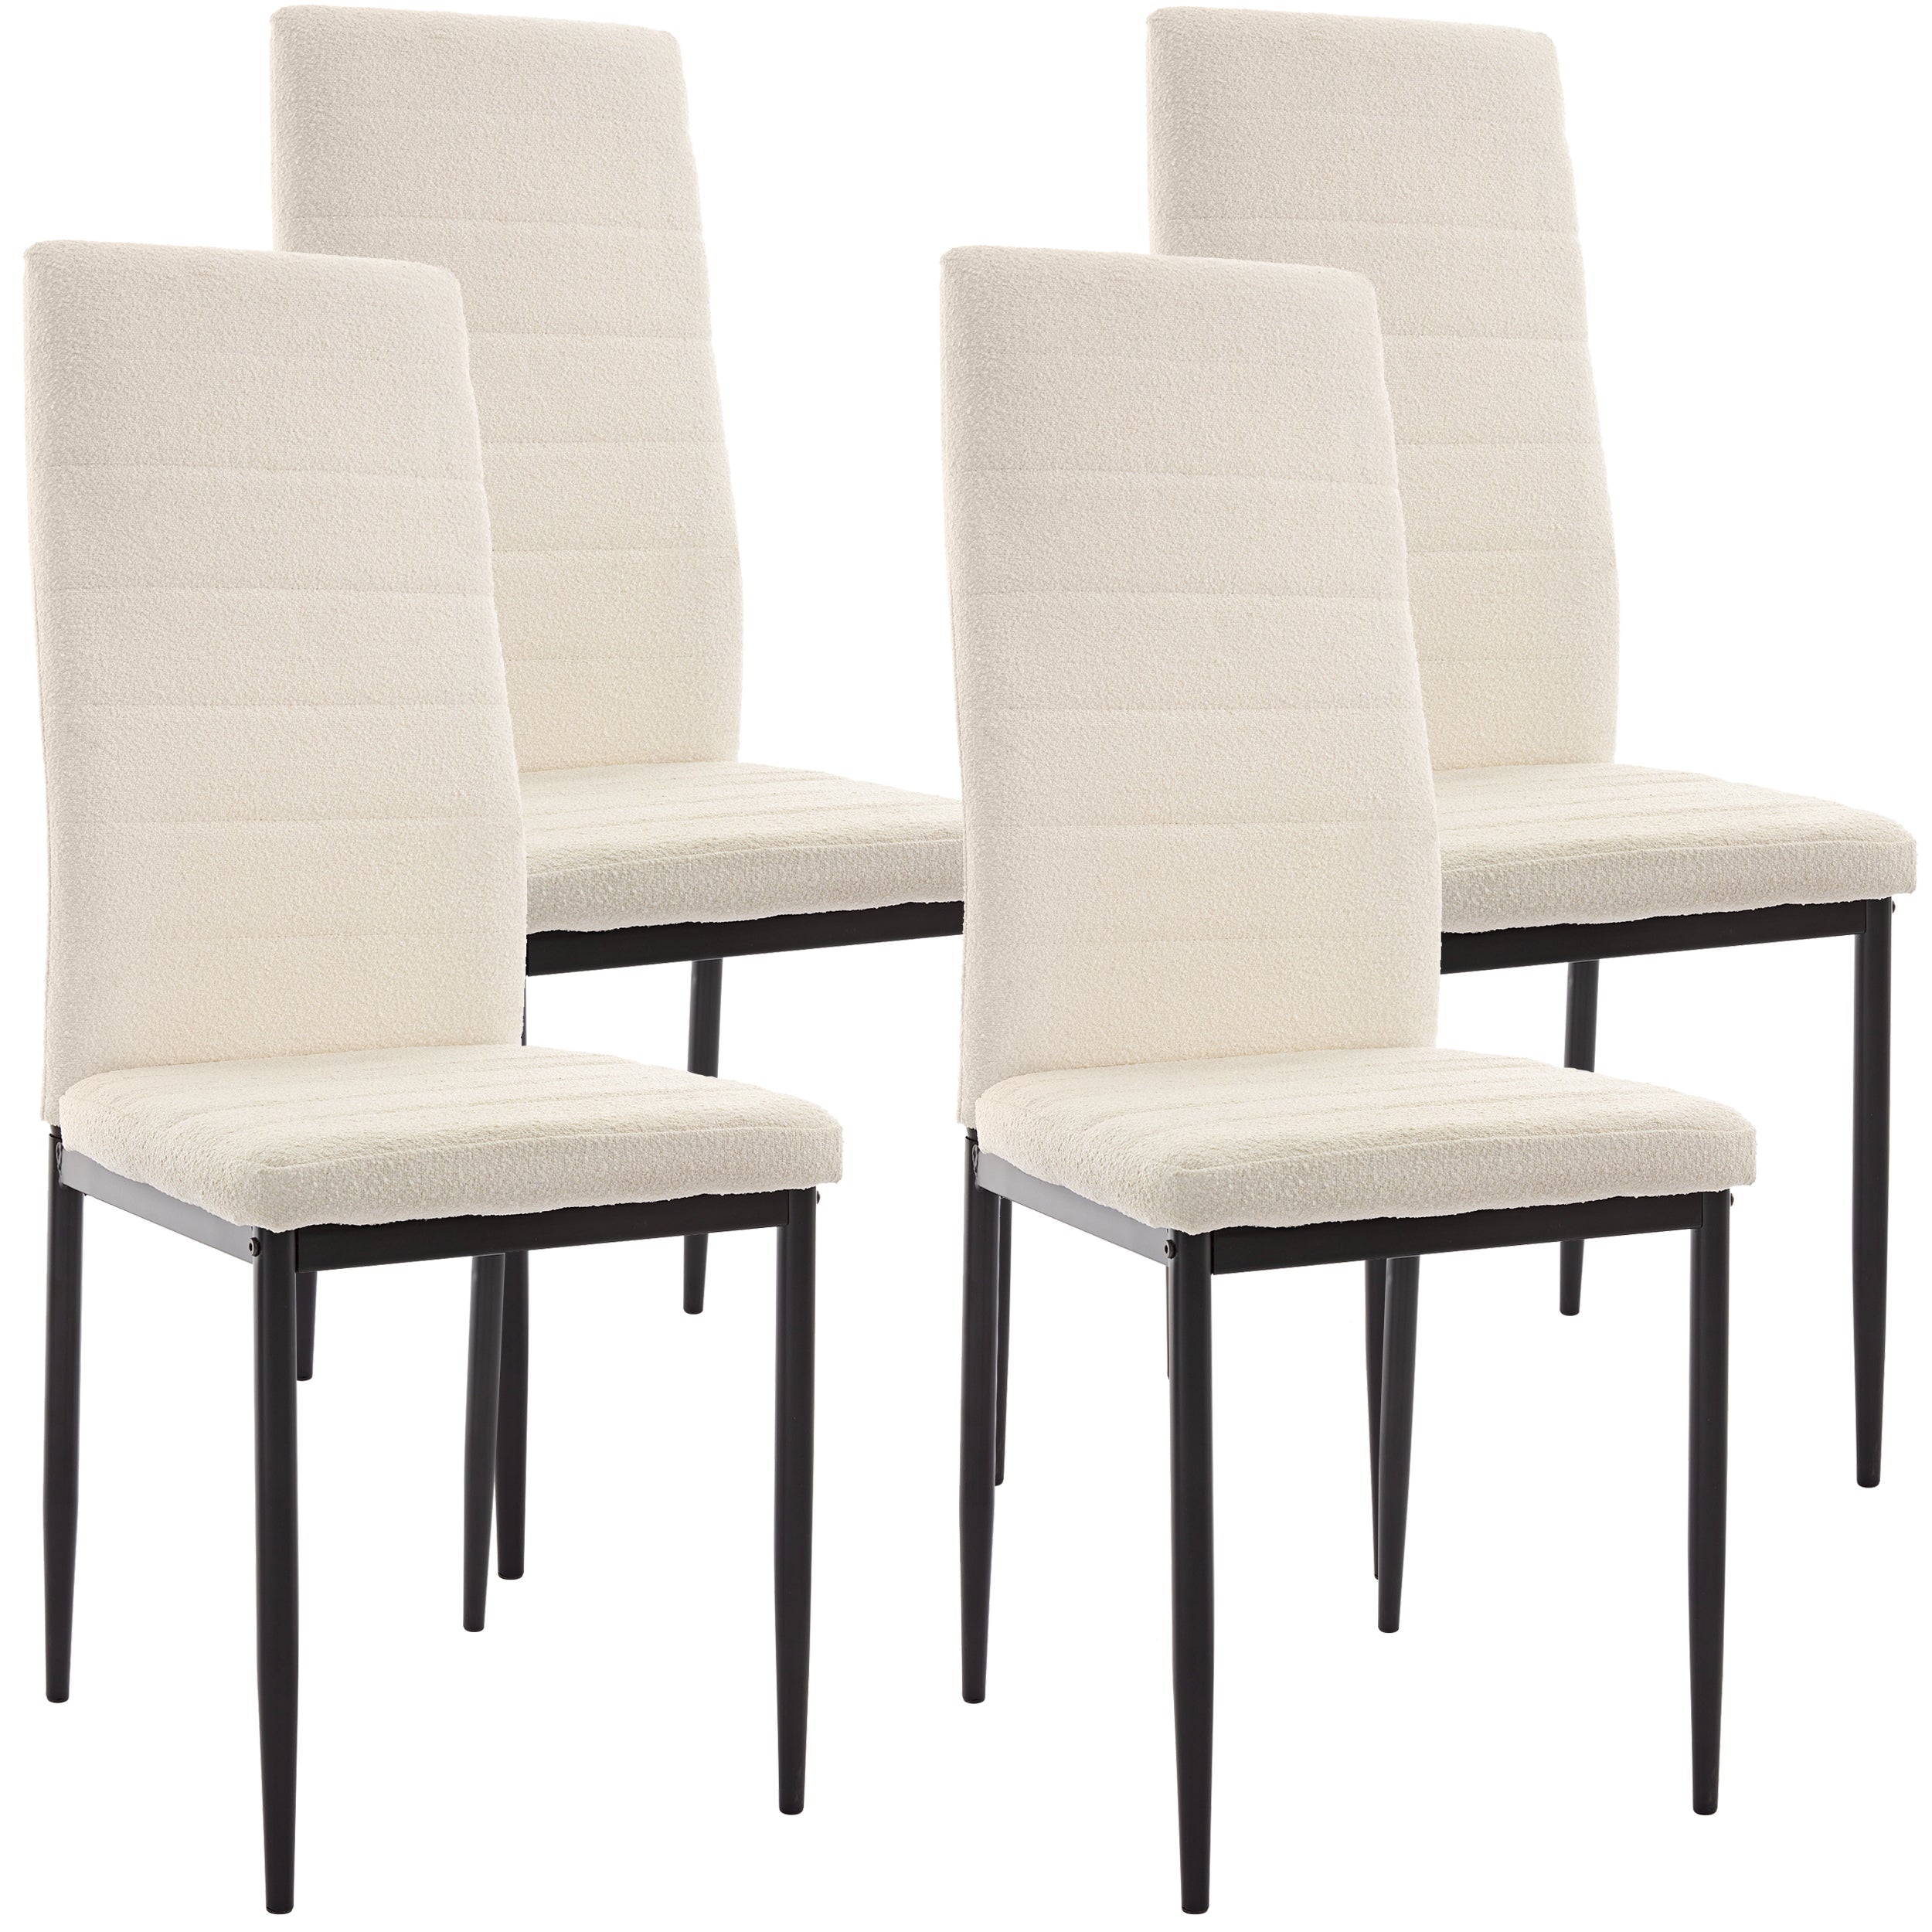 set of dining chairs 4